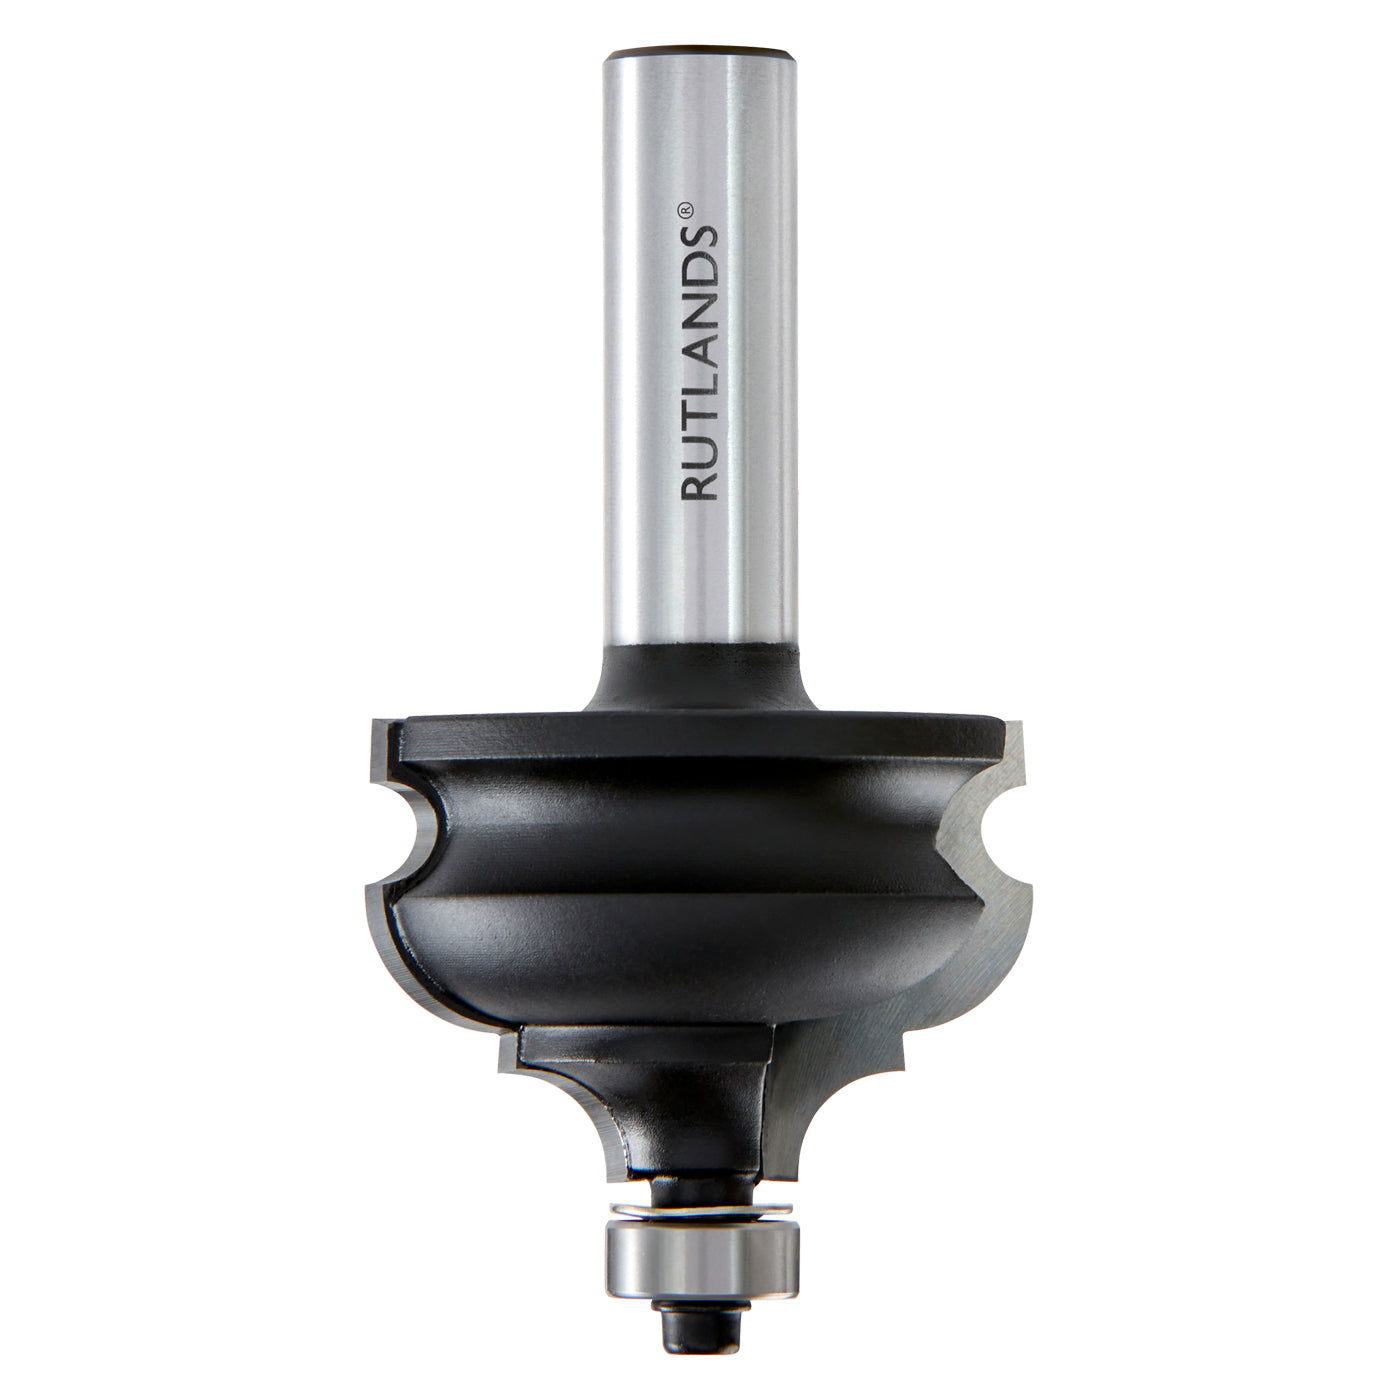 Router Bit - Bold Classical Ogee - D=44.5mm H=30.2mm R1=7.14mm L=84mm S=1/2"